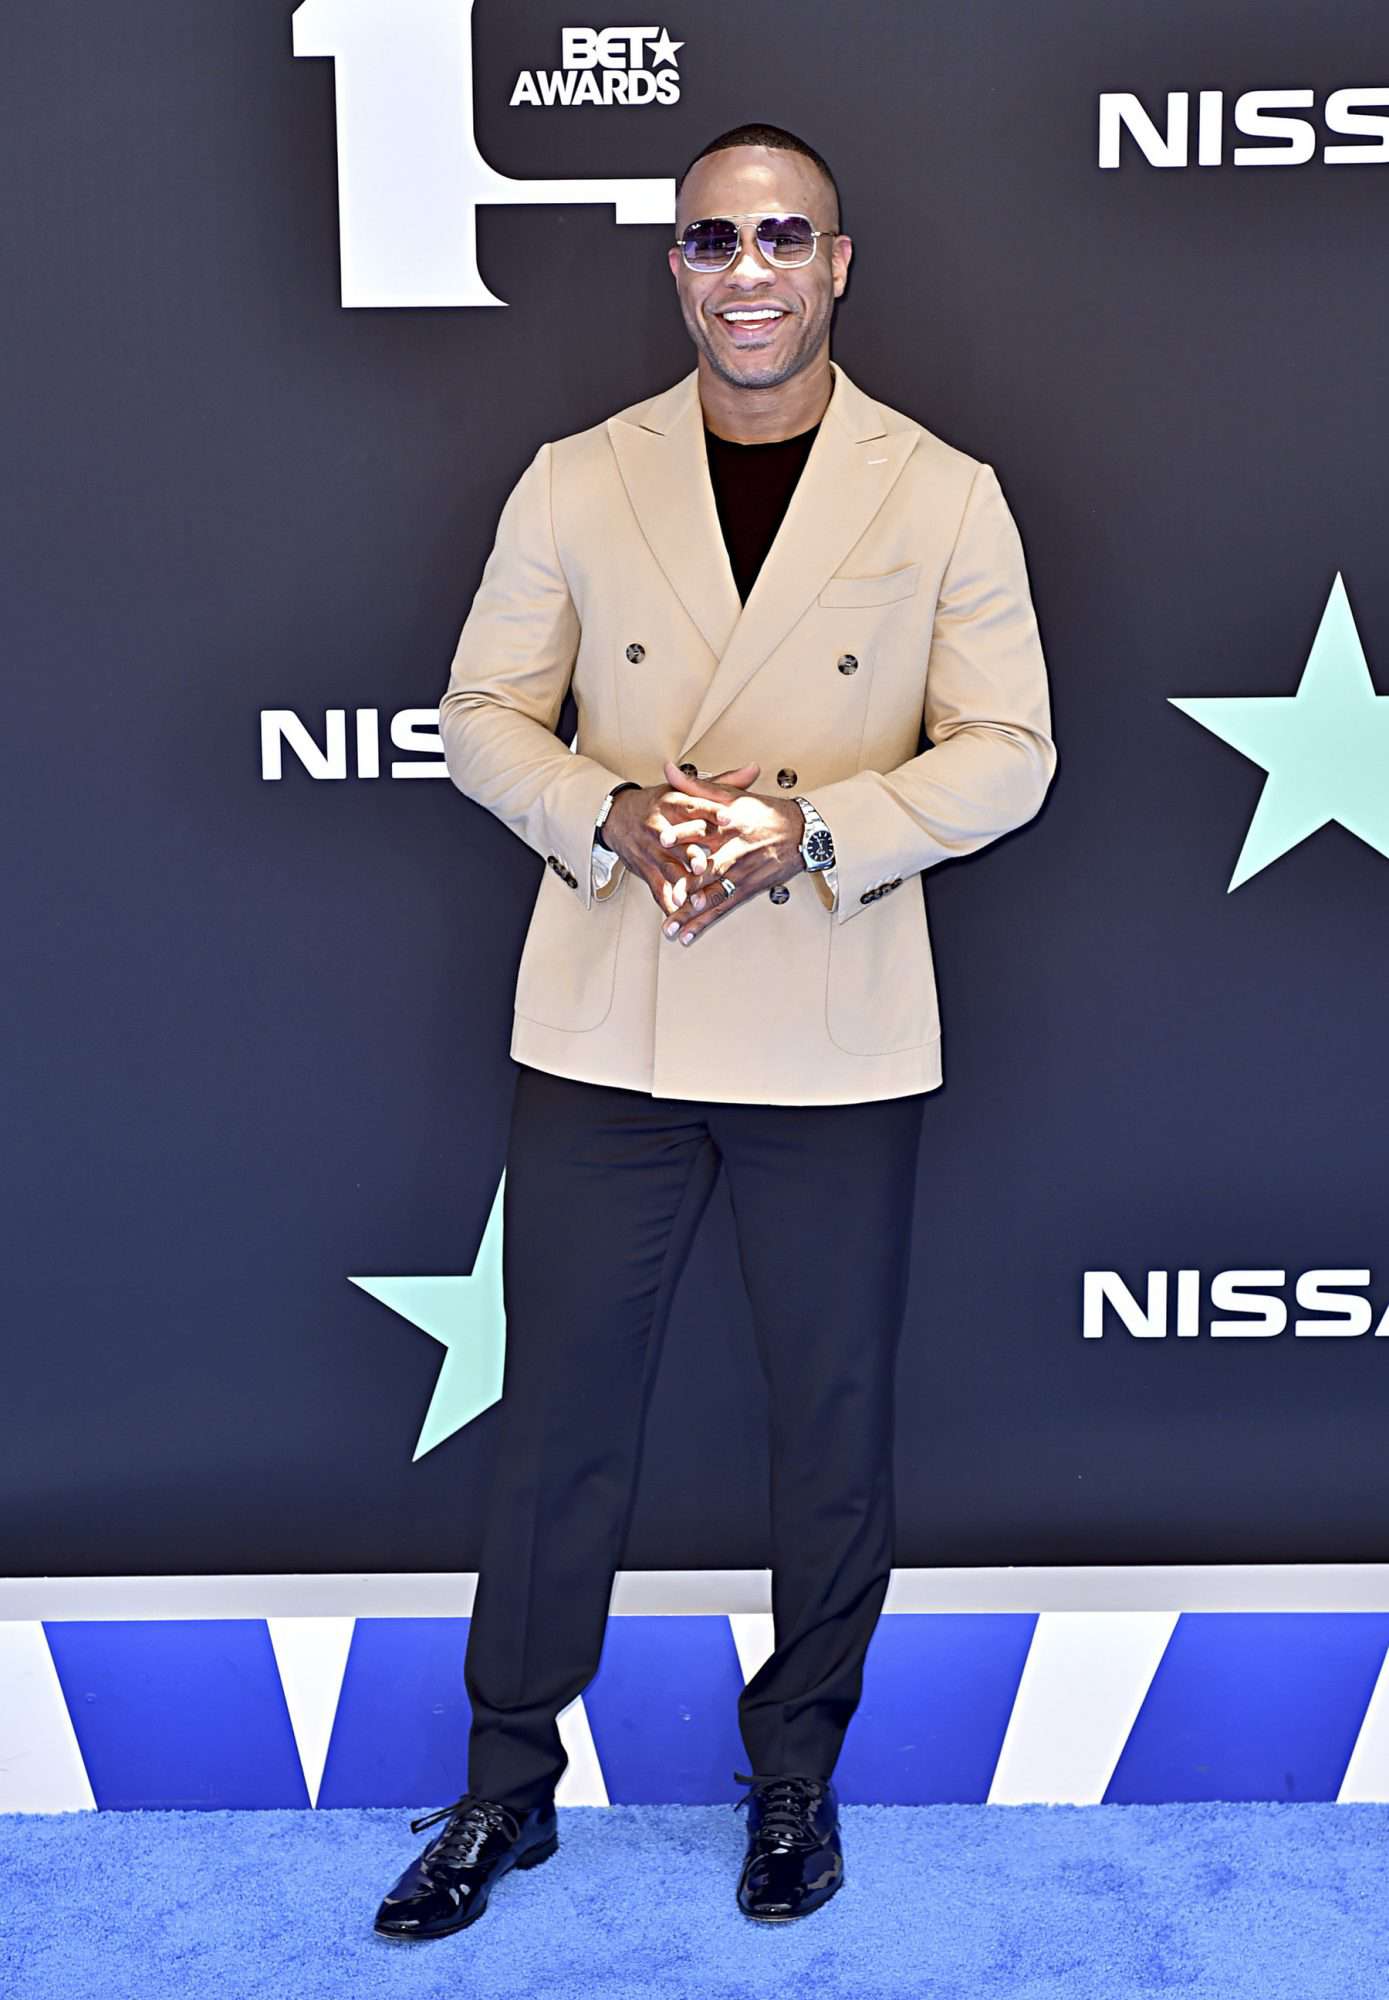 LOS ANGELES, CALIFORNIA - JUNE 23: DeVon Franklin attends the 2019 BET Awards on June 23, 2019 in Los Angeles, California. (Photo by Aaron J. Thornton/Getty Images for BET)